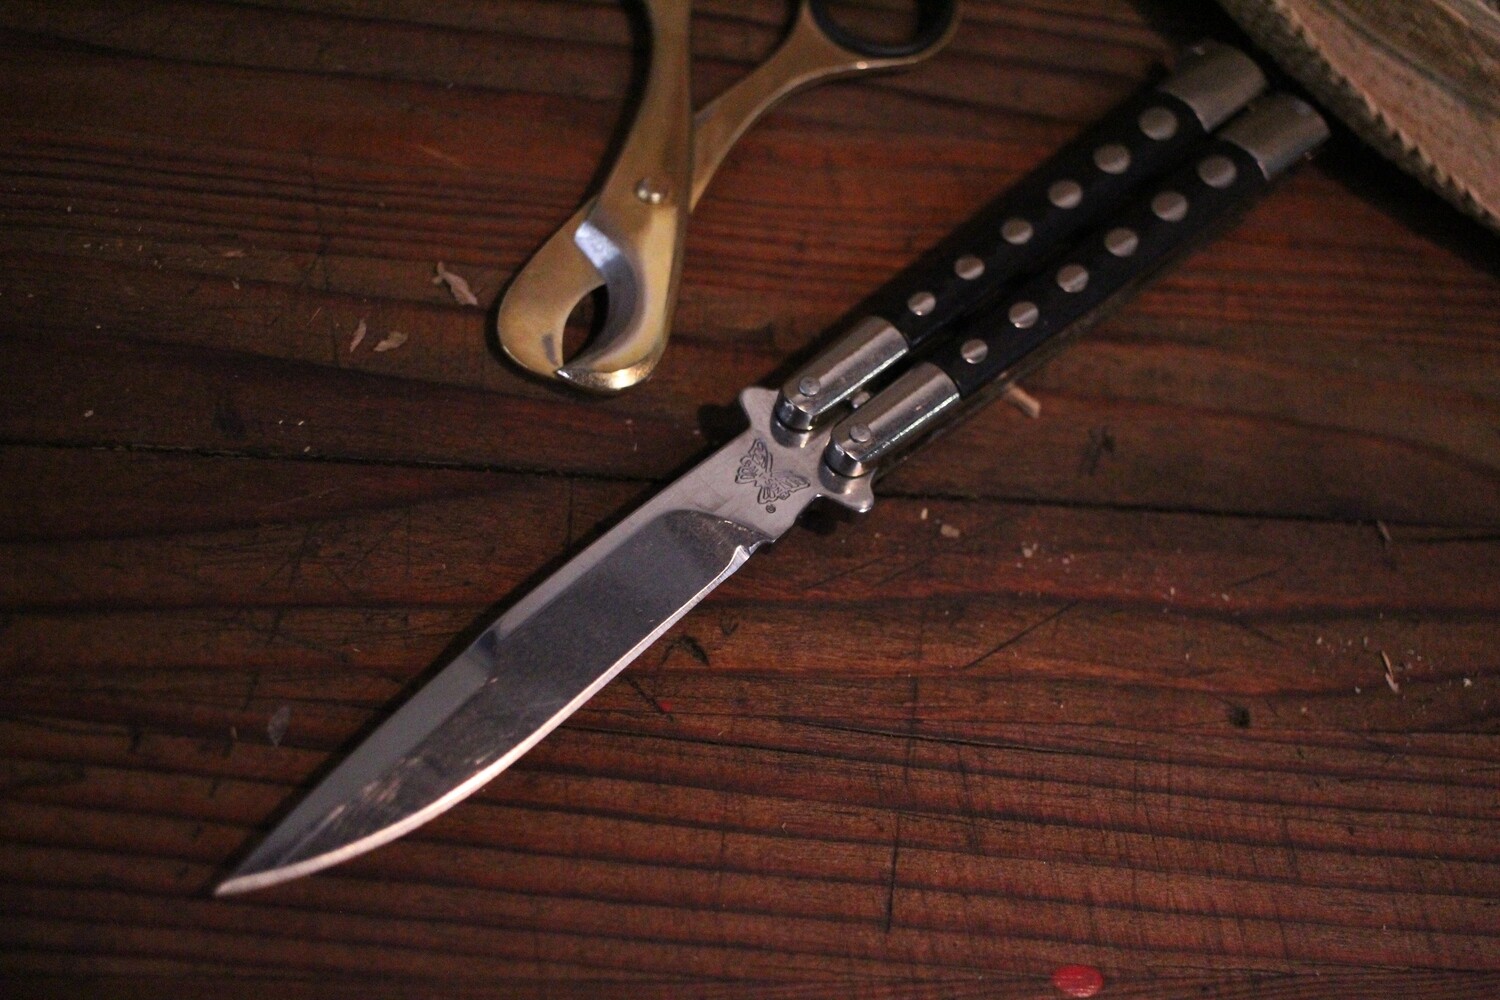 Michigan Knife Laws: Are Switchblades Legal in Michigan?